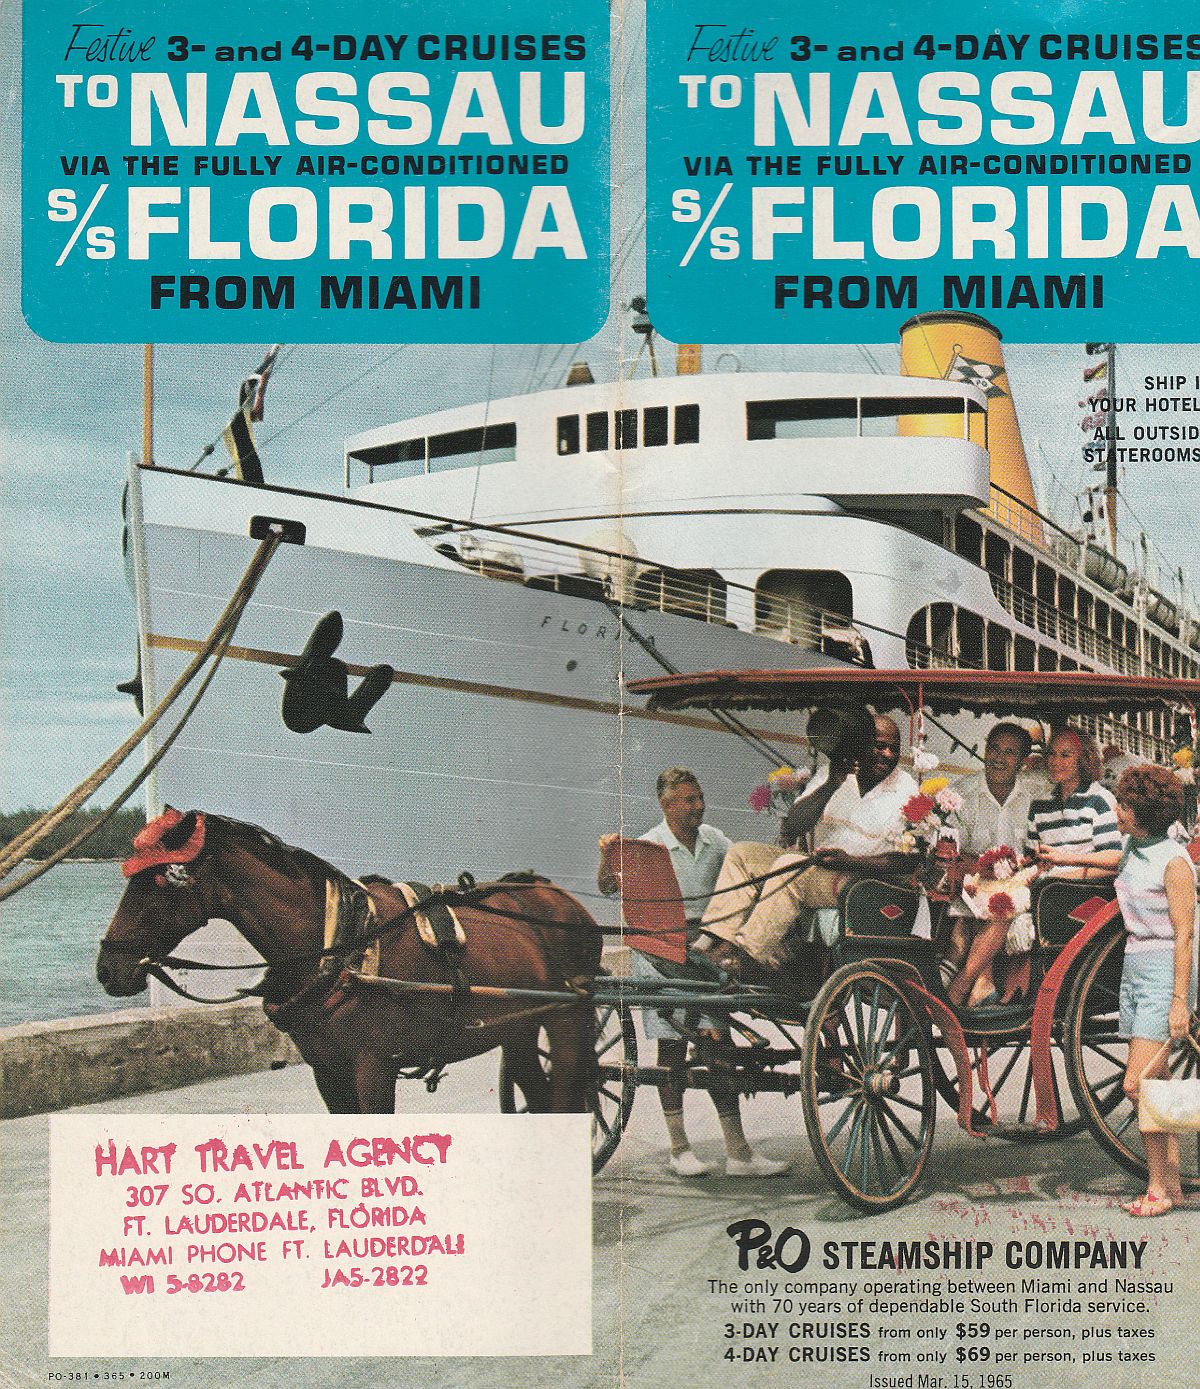 ss Florida Brochure issued Mar. 15, 1965: Festive 3- and 4-day cruises to Nassau